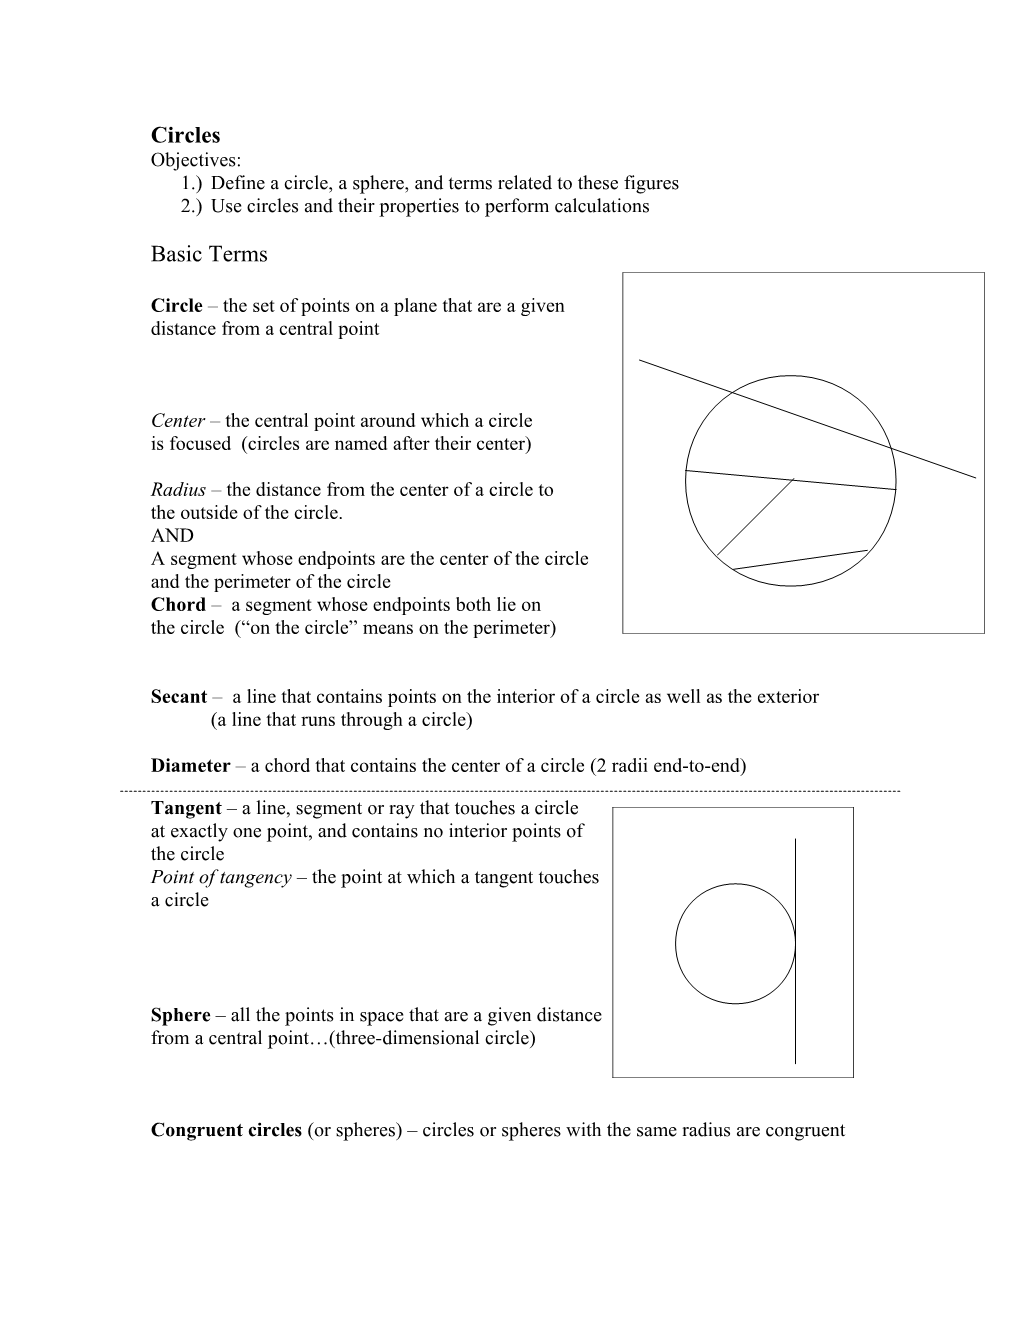 1.)Define a Circle, a Sphere, and Terms Related to These Figures